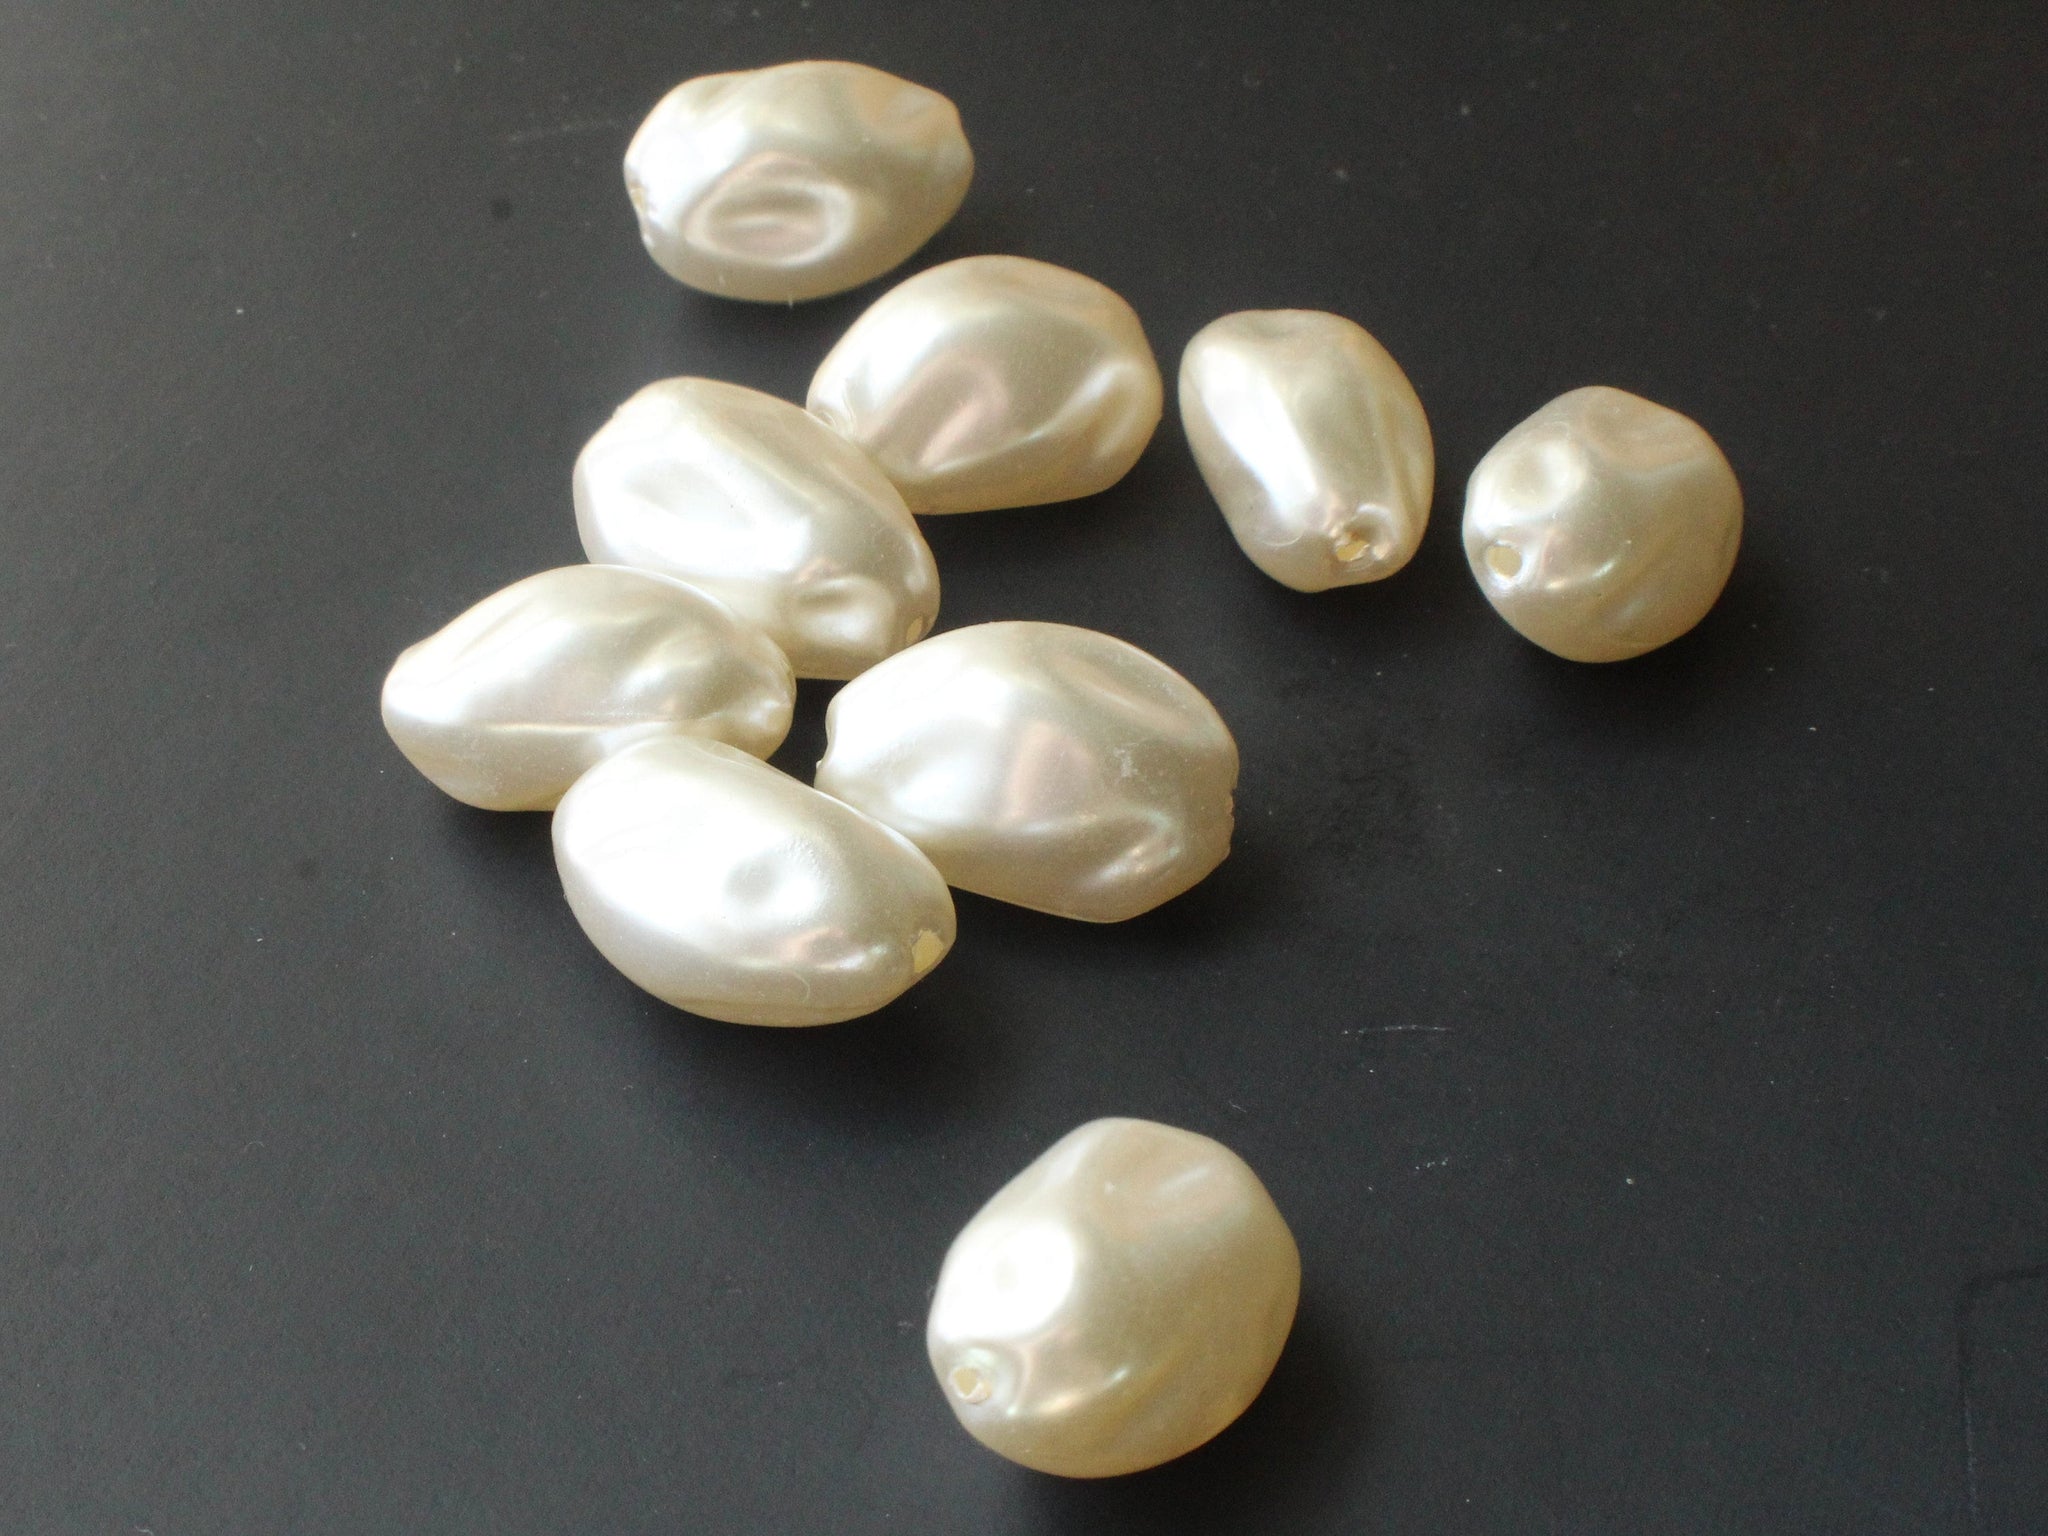 TOAOB 1100pcs Pearl Beads for Jewelry Making 5mm Plastic Pearl